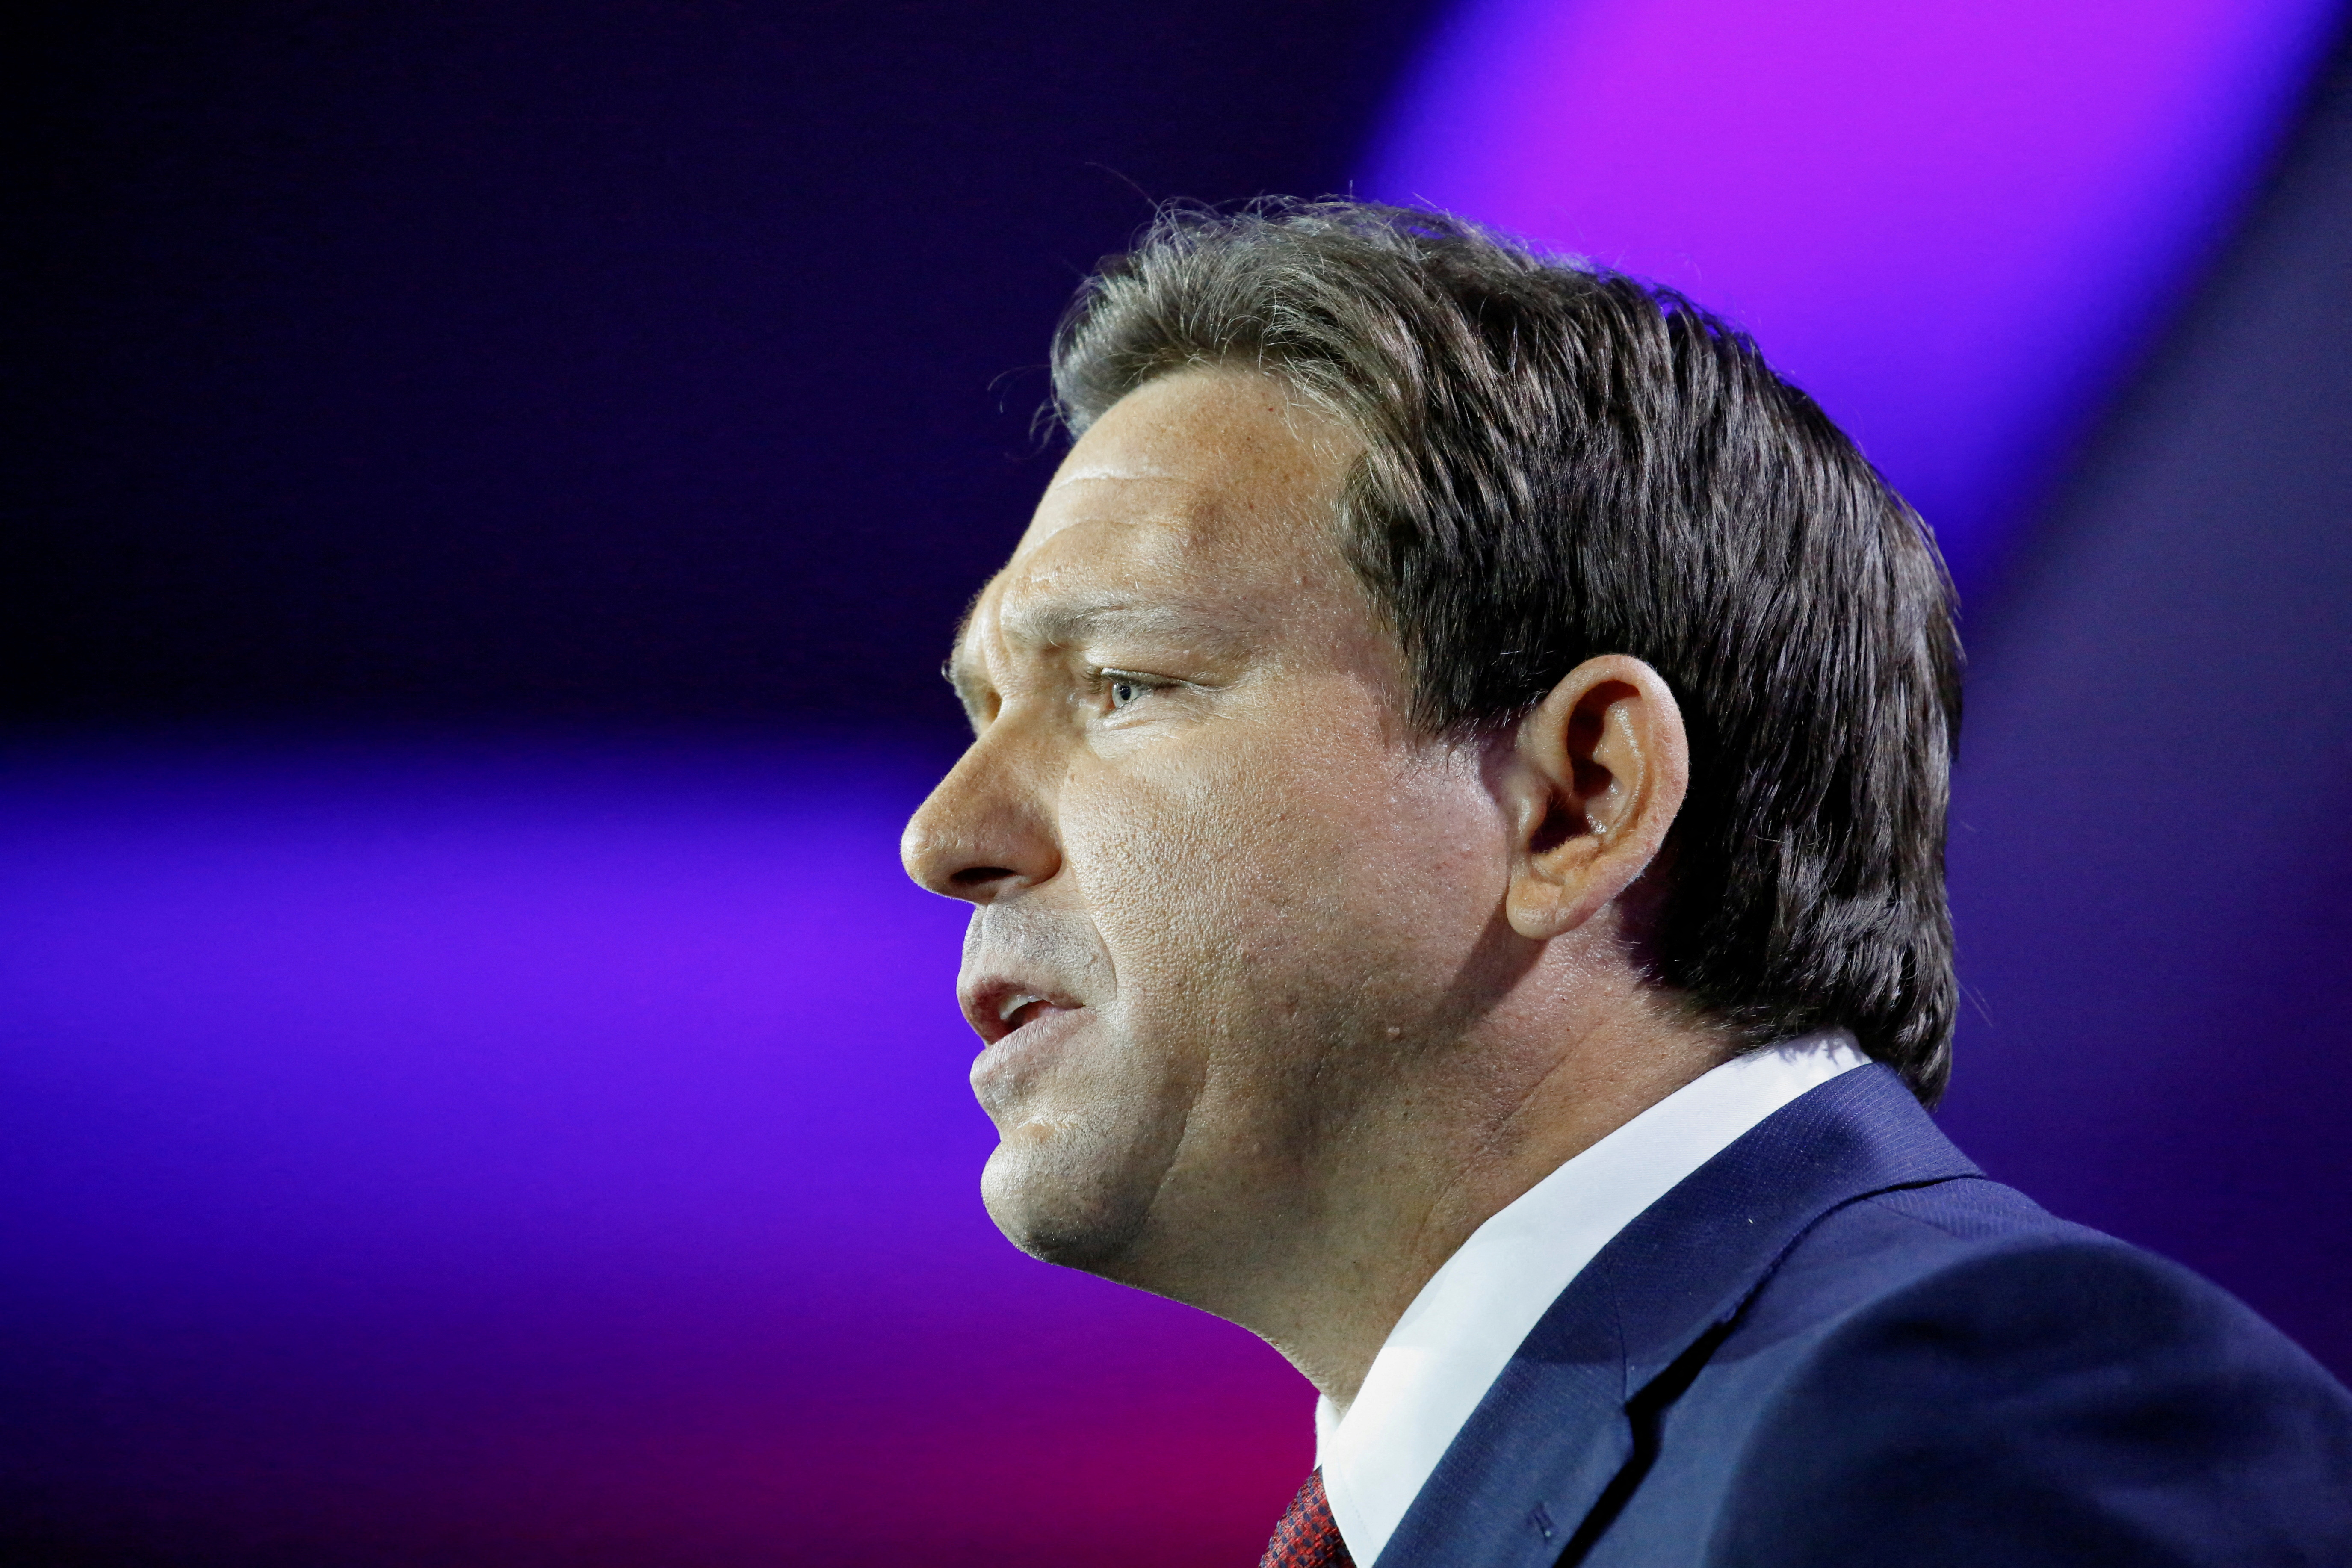 Republican Governor DeSantis holds 2022 U.S. midterm elections night party in Tampa, Florida